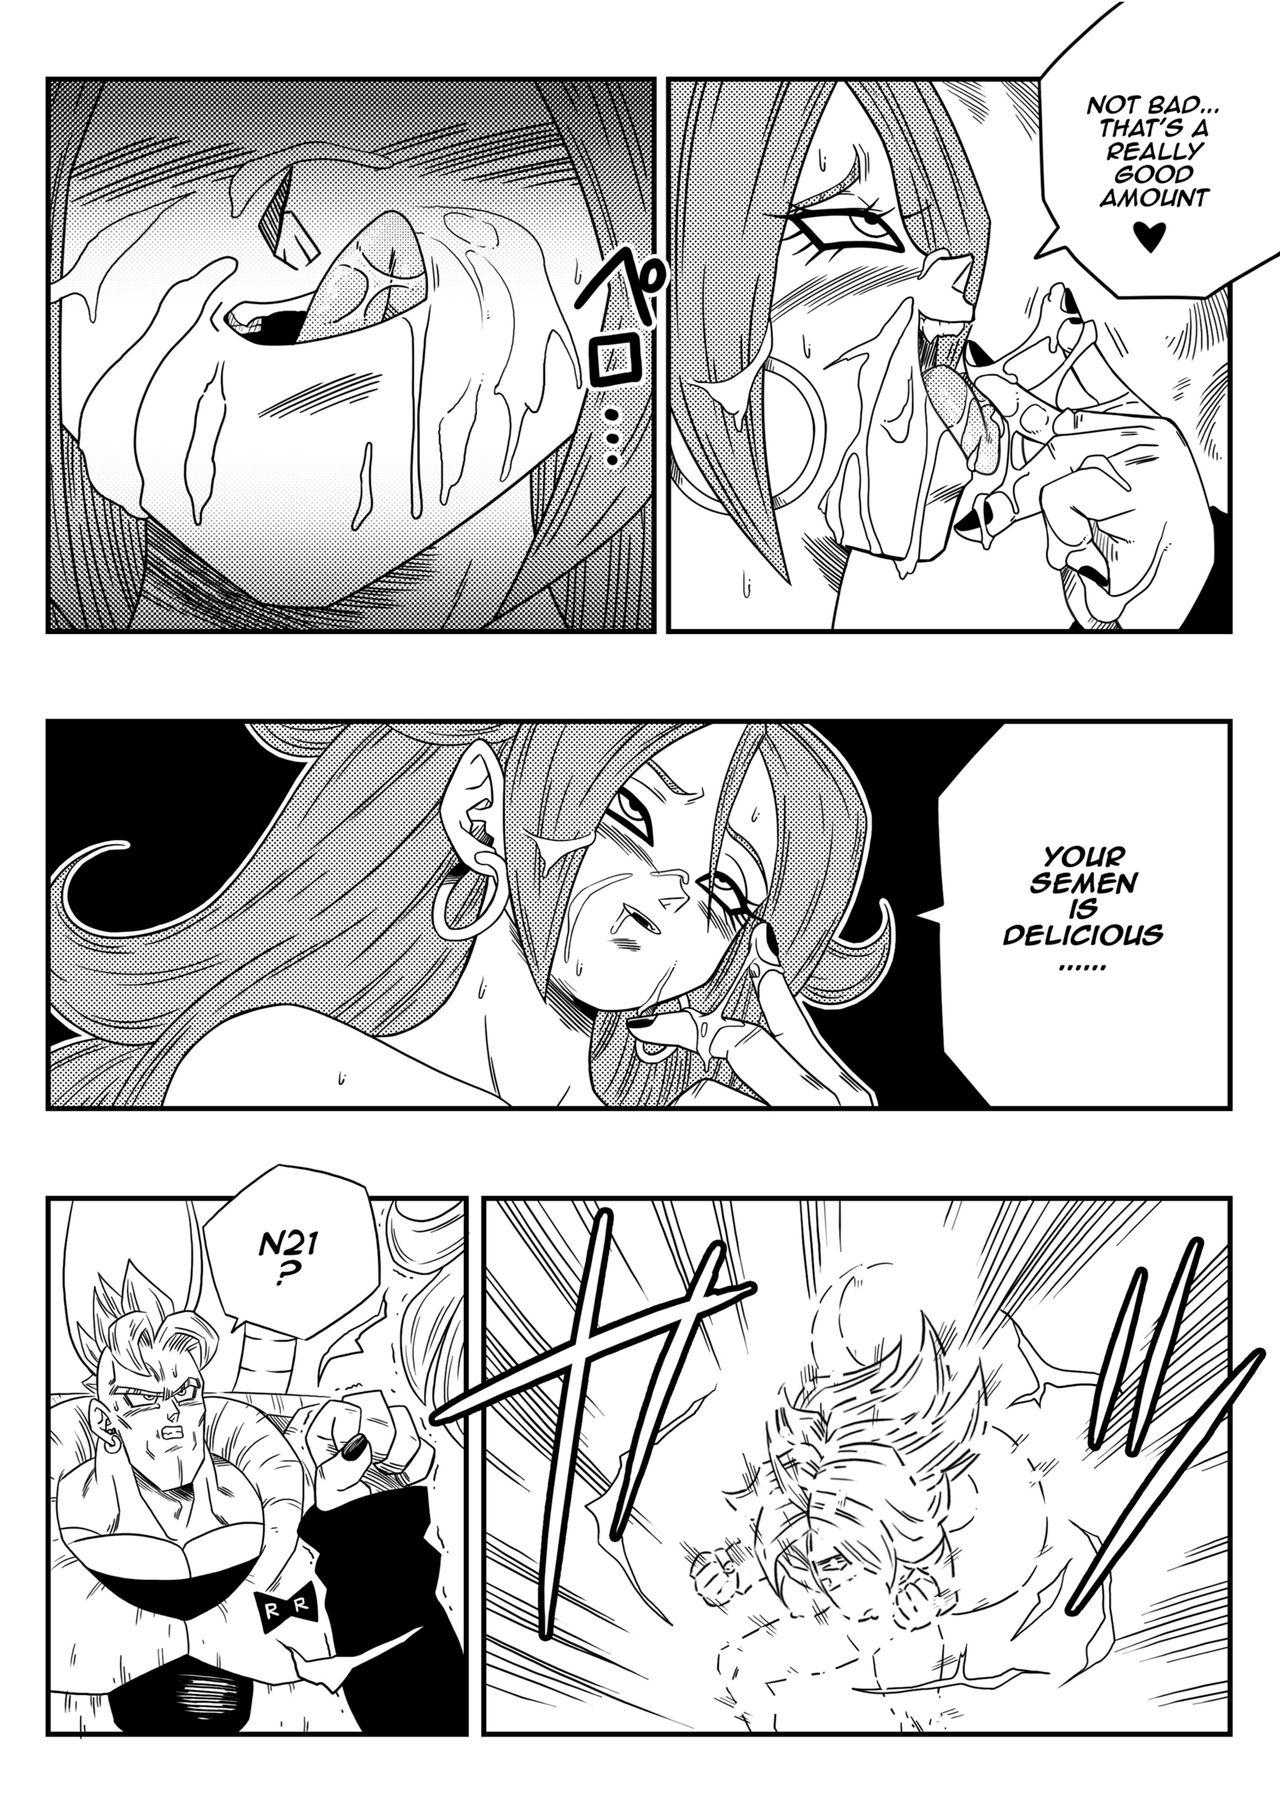 Femdom Porn Kyonyuu Android Sekai Seiha o Netsubou!! Android 21 Shutsugen!! | Busty Android Wants to Dominate the World! - Dragon ball Black Gay - Page 9